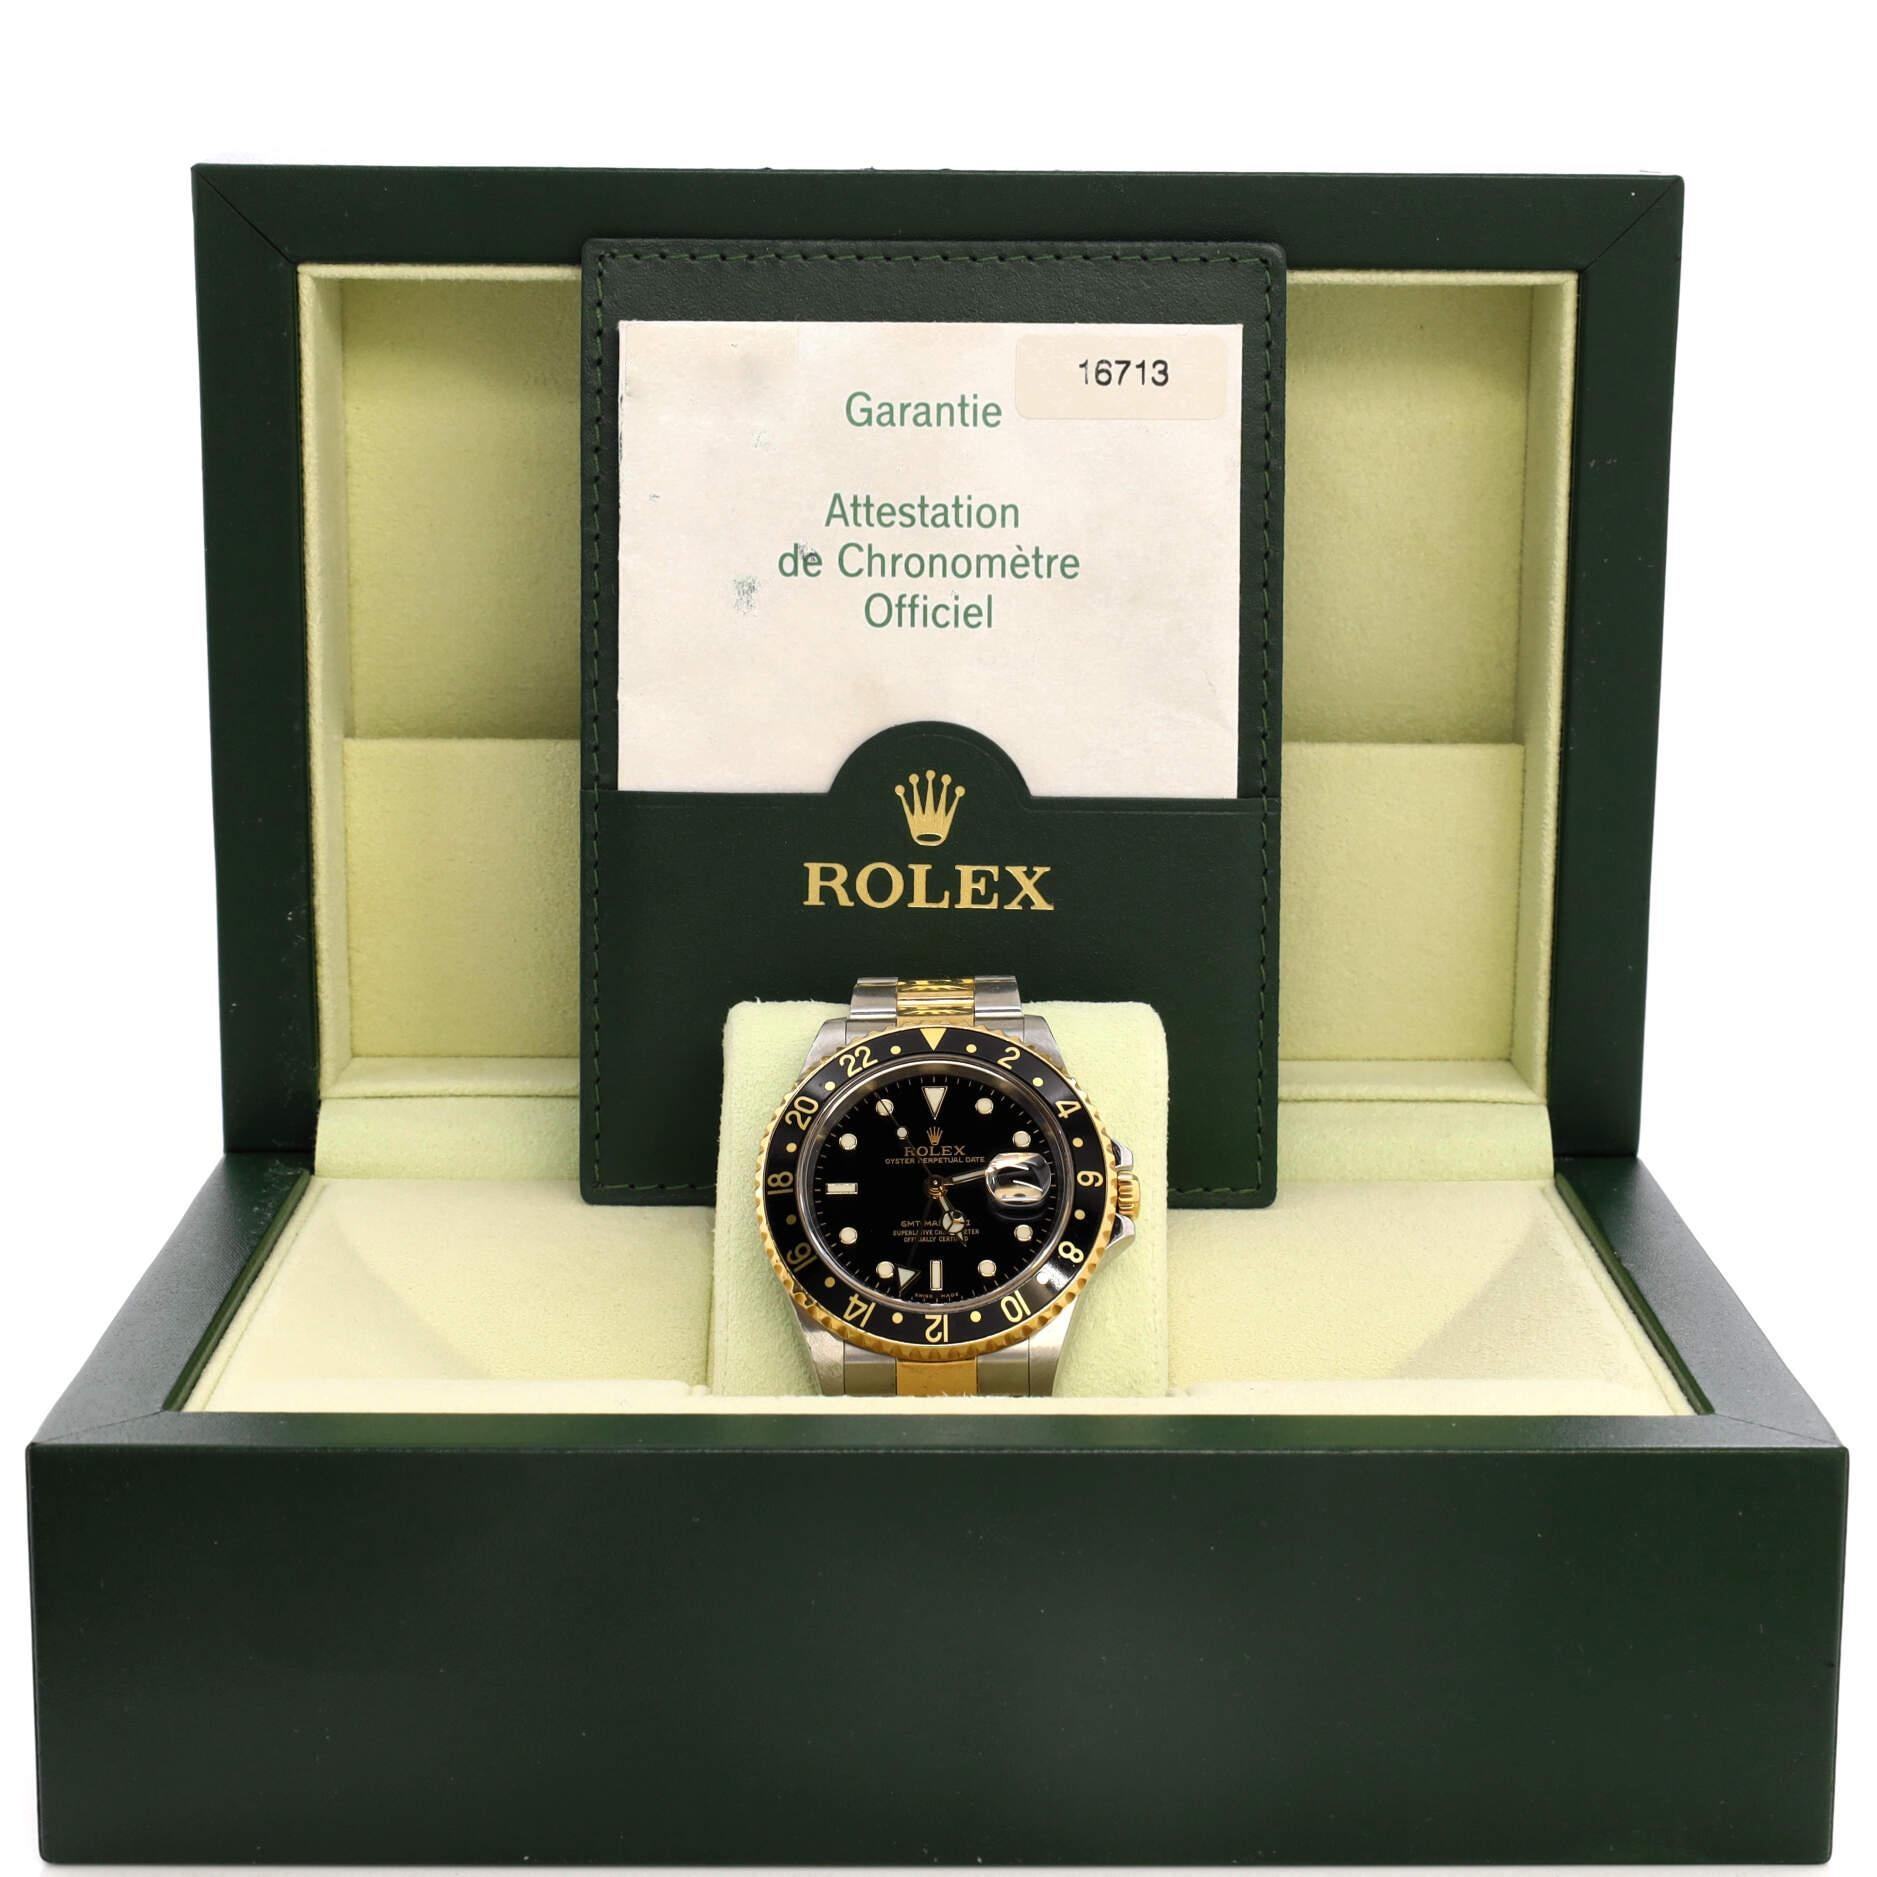 Condition: Good. Heavy scratches, dings, and wear throughout. Wear, dings, and scratches on case and bracelet.
Accessories: Box, Warranty Card - Undated
Measurements: Case Size/Width: 40mm, Watch Height: 12mm, Band Width: 20mm, Wrist circumference: